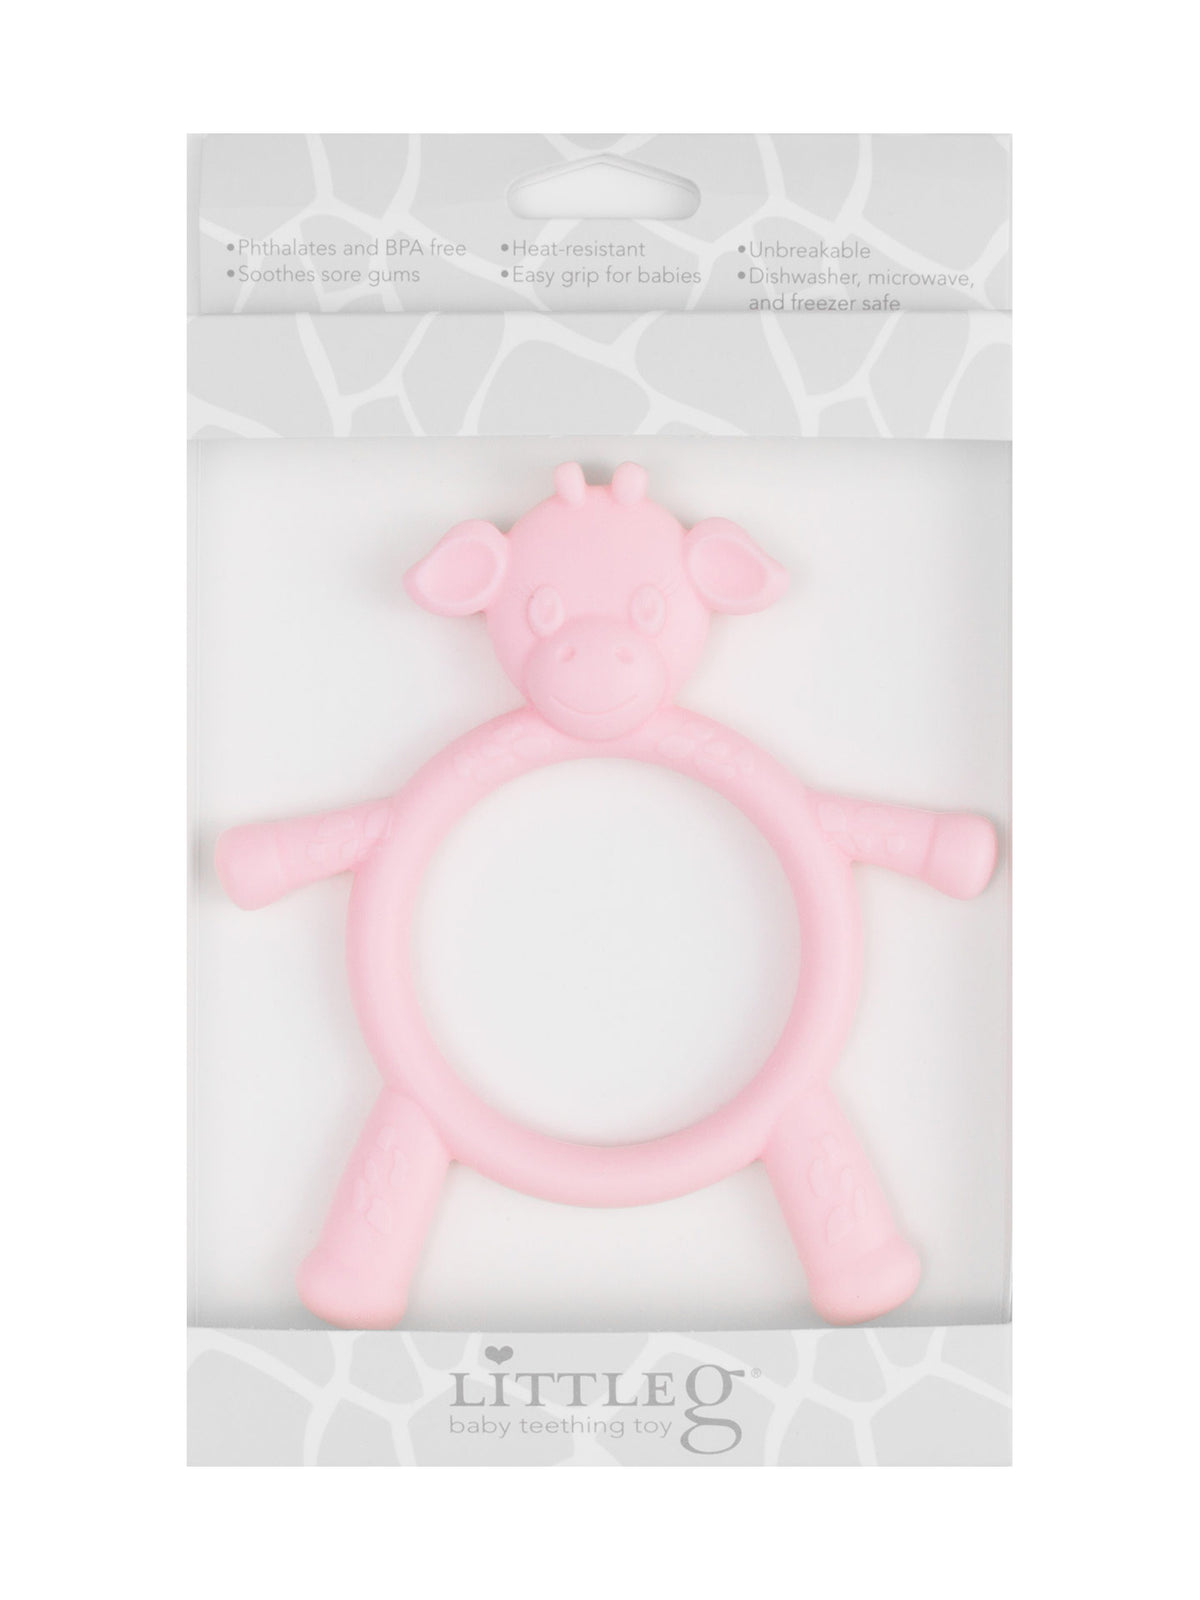 Little G™ Teething Toy